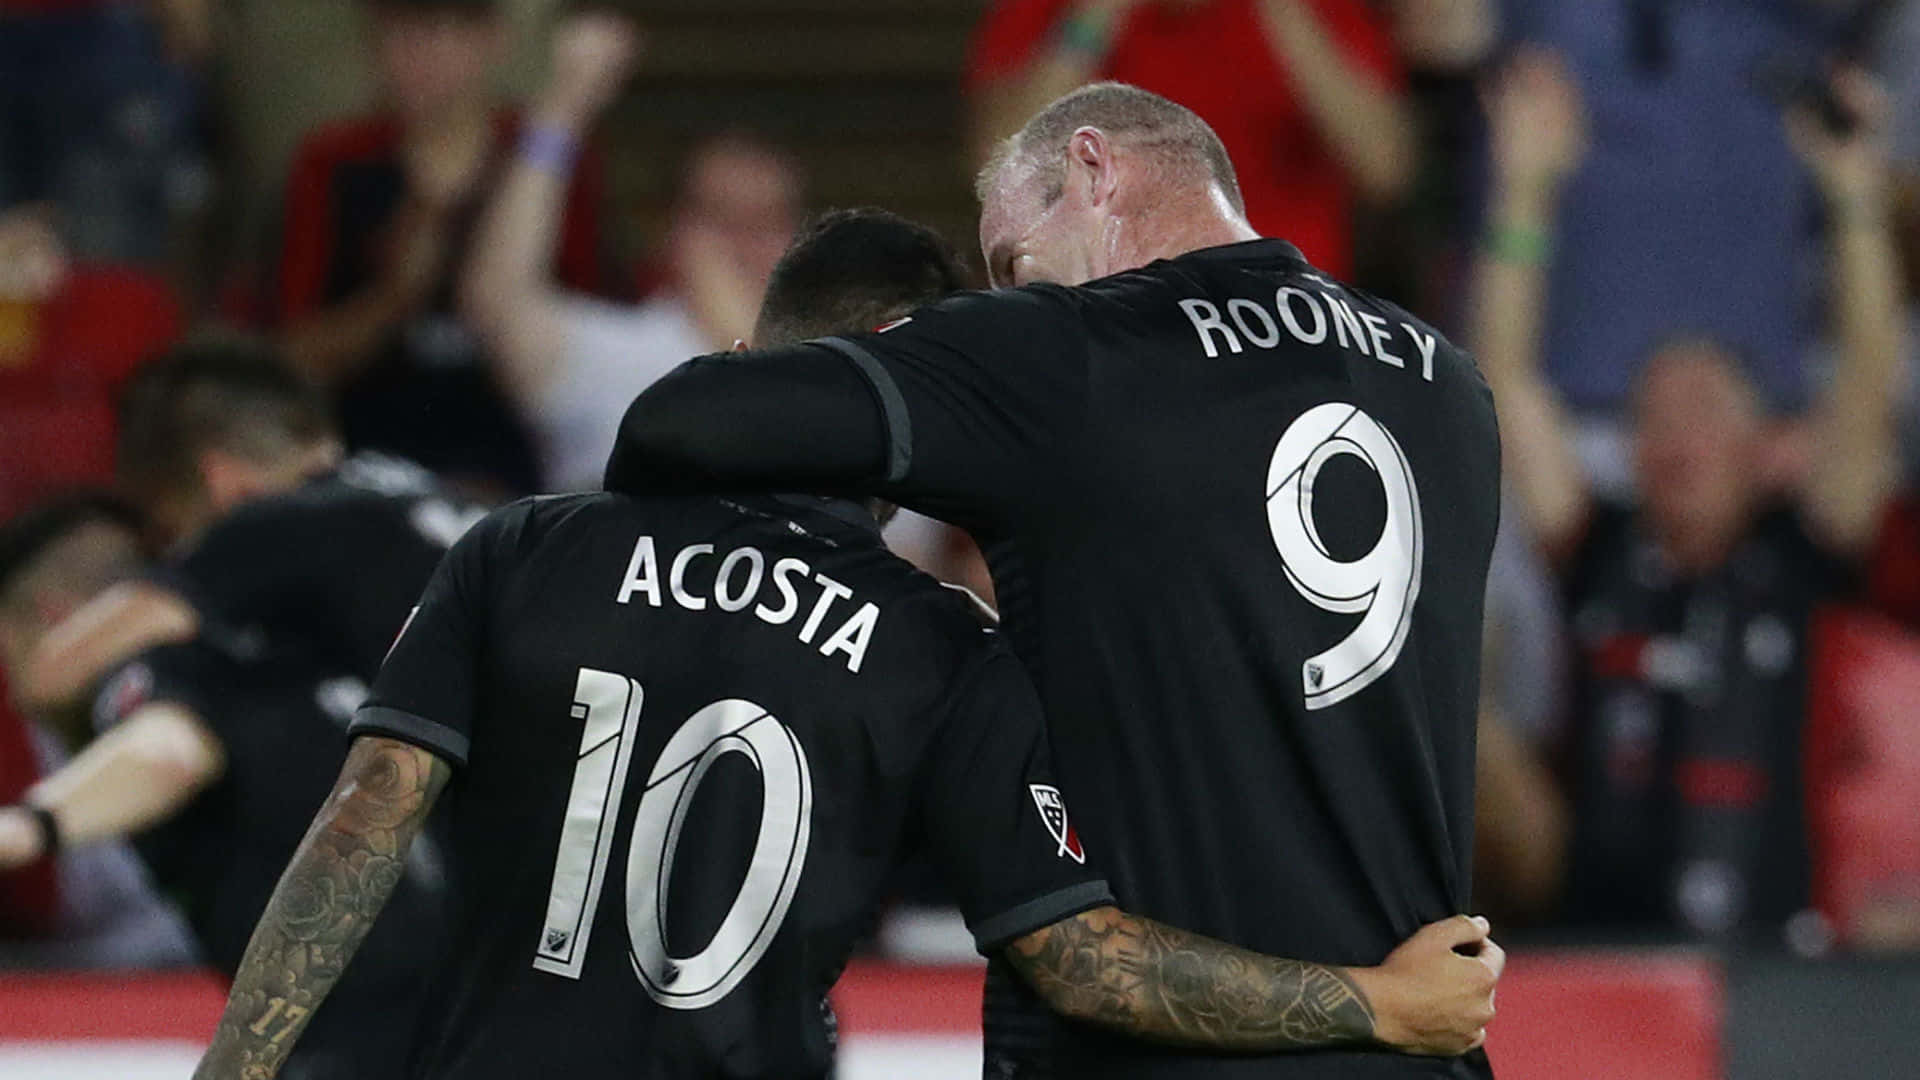 Luciano Acosta And Team Captain Rooney Picture